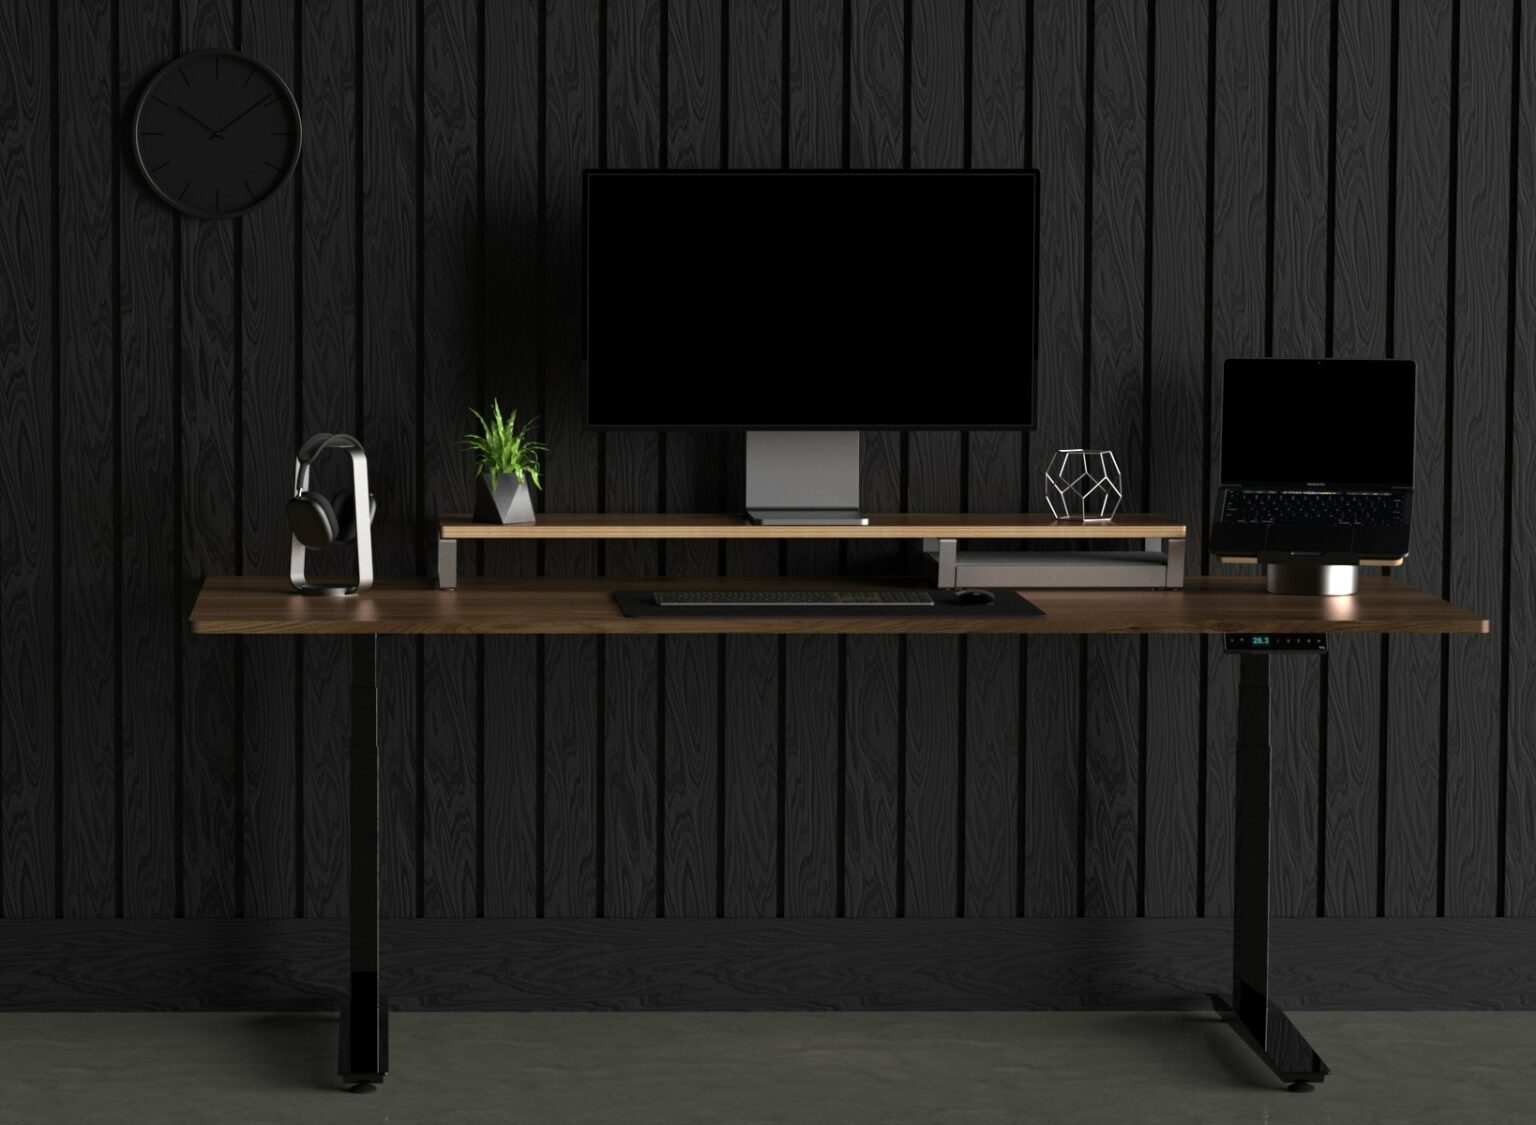 HumanCentric's ultimate giveaway could help you build the workspace setup of your dreams.